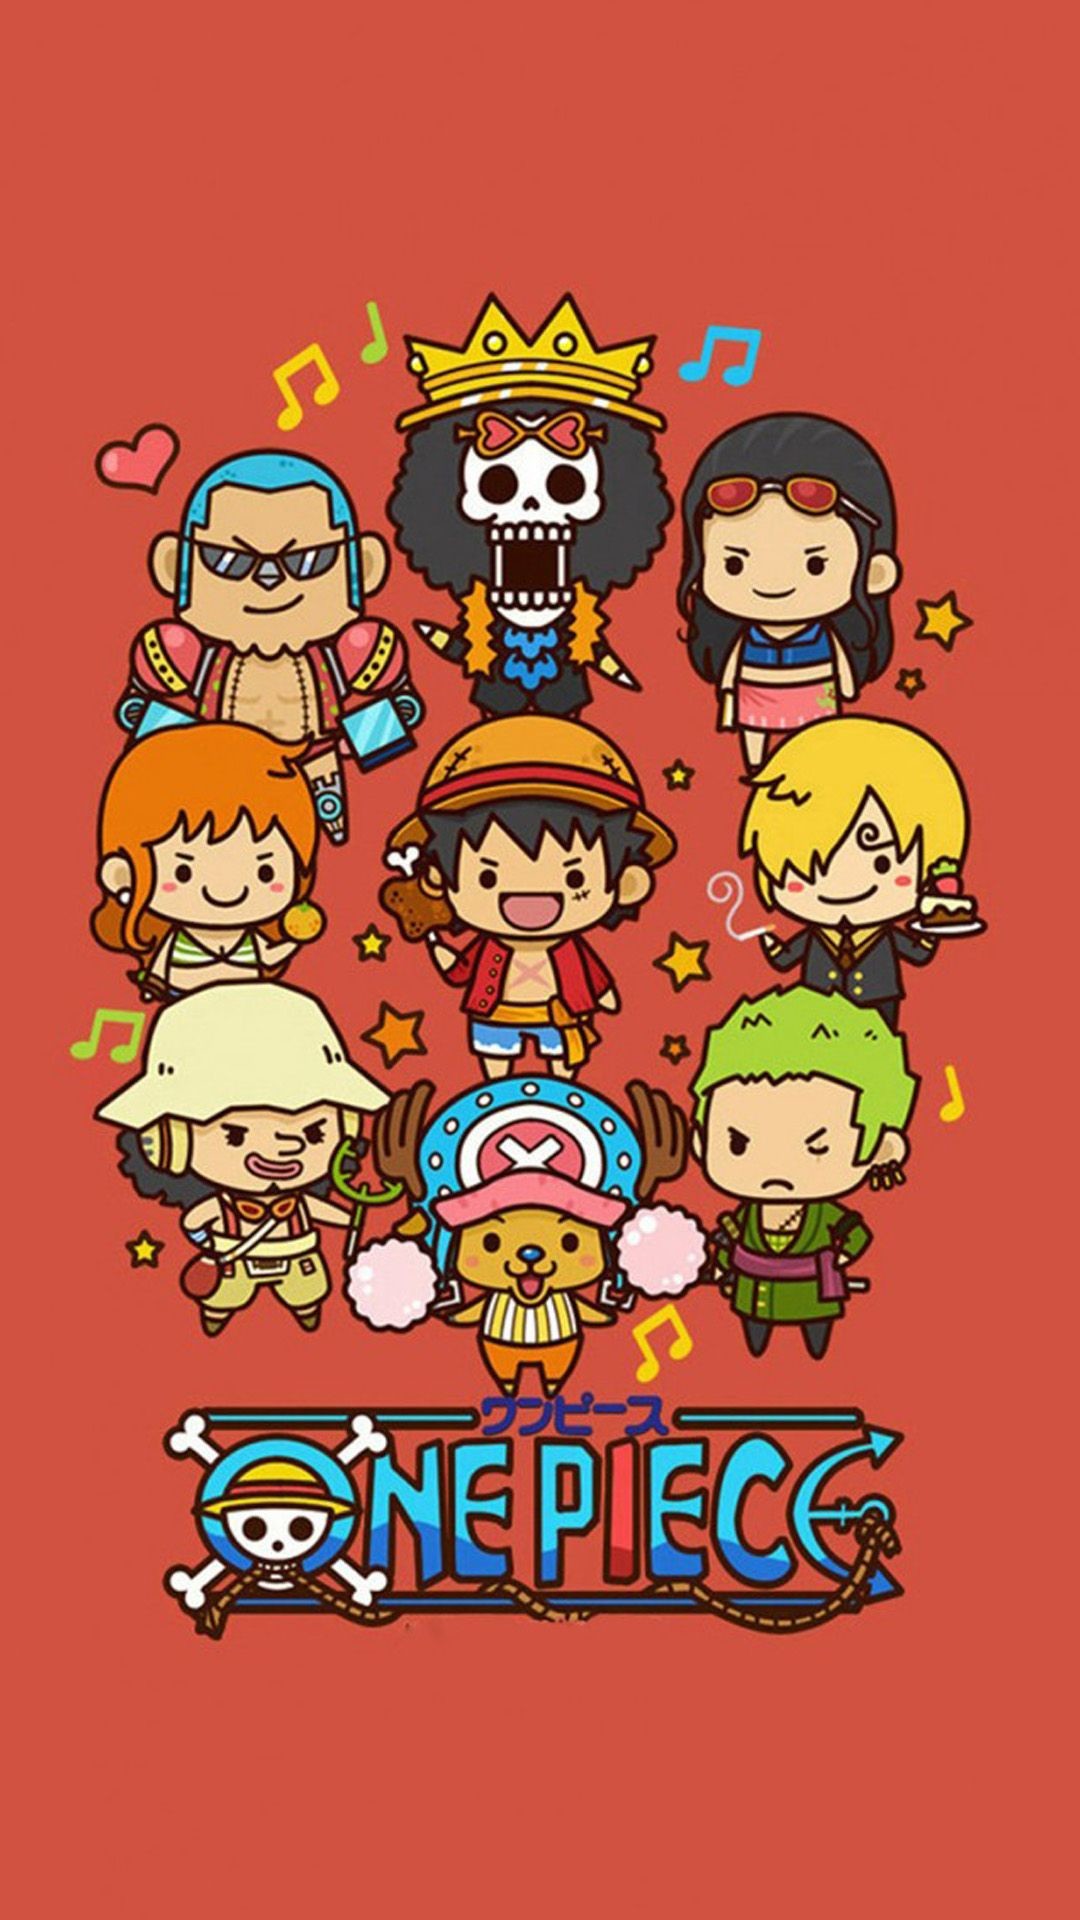 1080x1920 Cute Lovely One Piece Cartoon Poster #iPhone #6 #plus #wallpaper